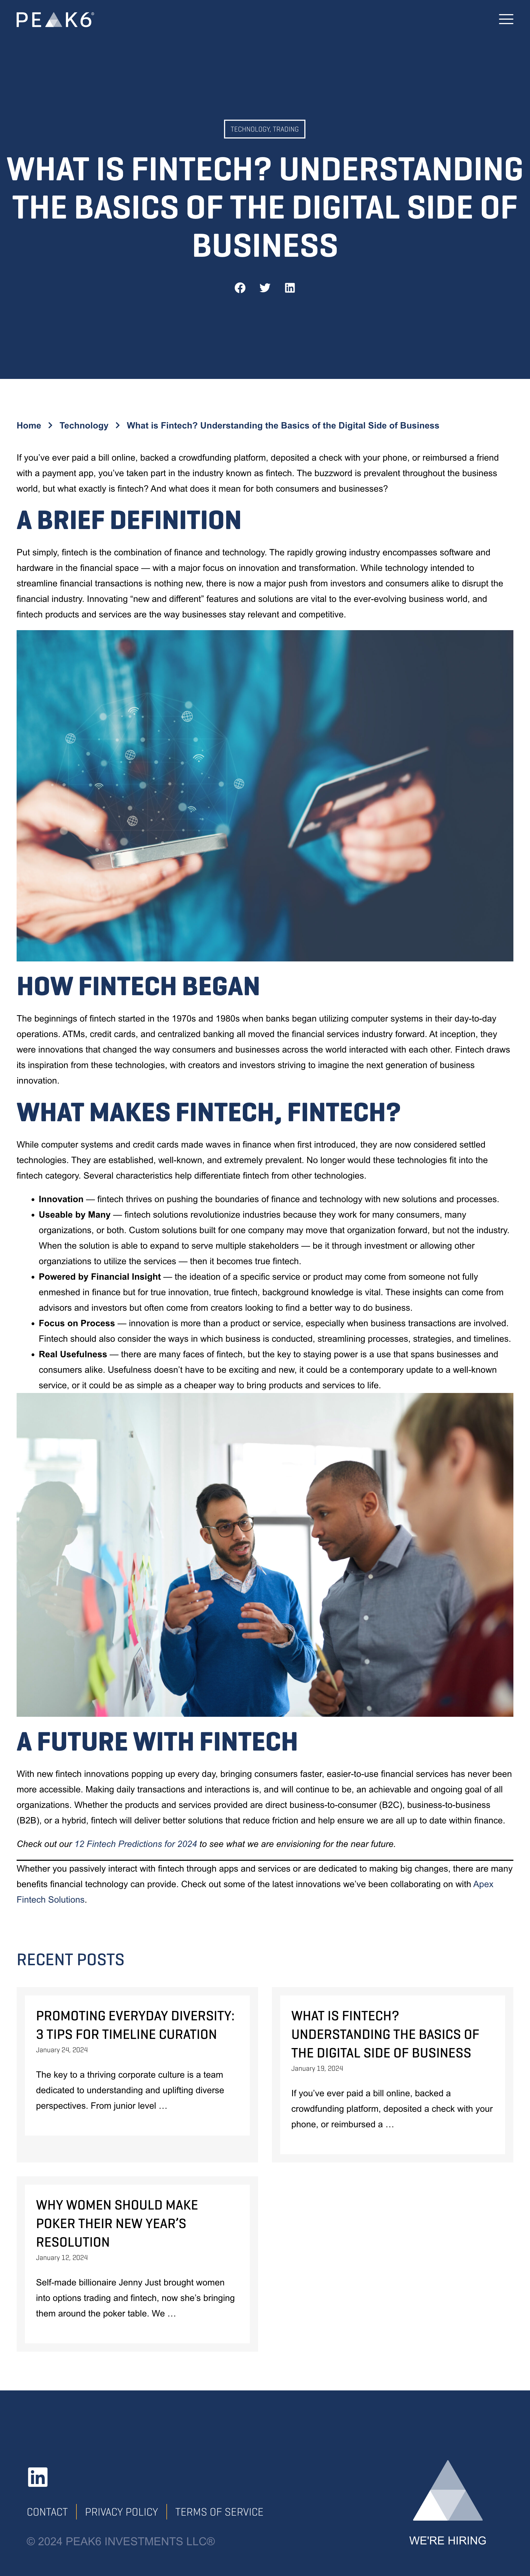 peak6.com_what-is-fintech-understanding-the-basics-of-the-digital-side-of-business_.png